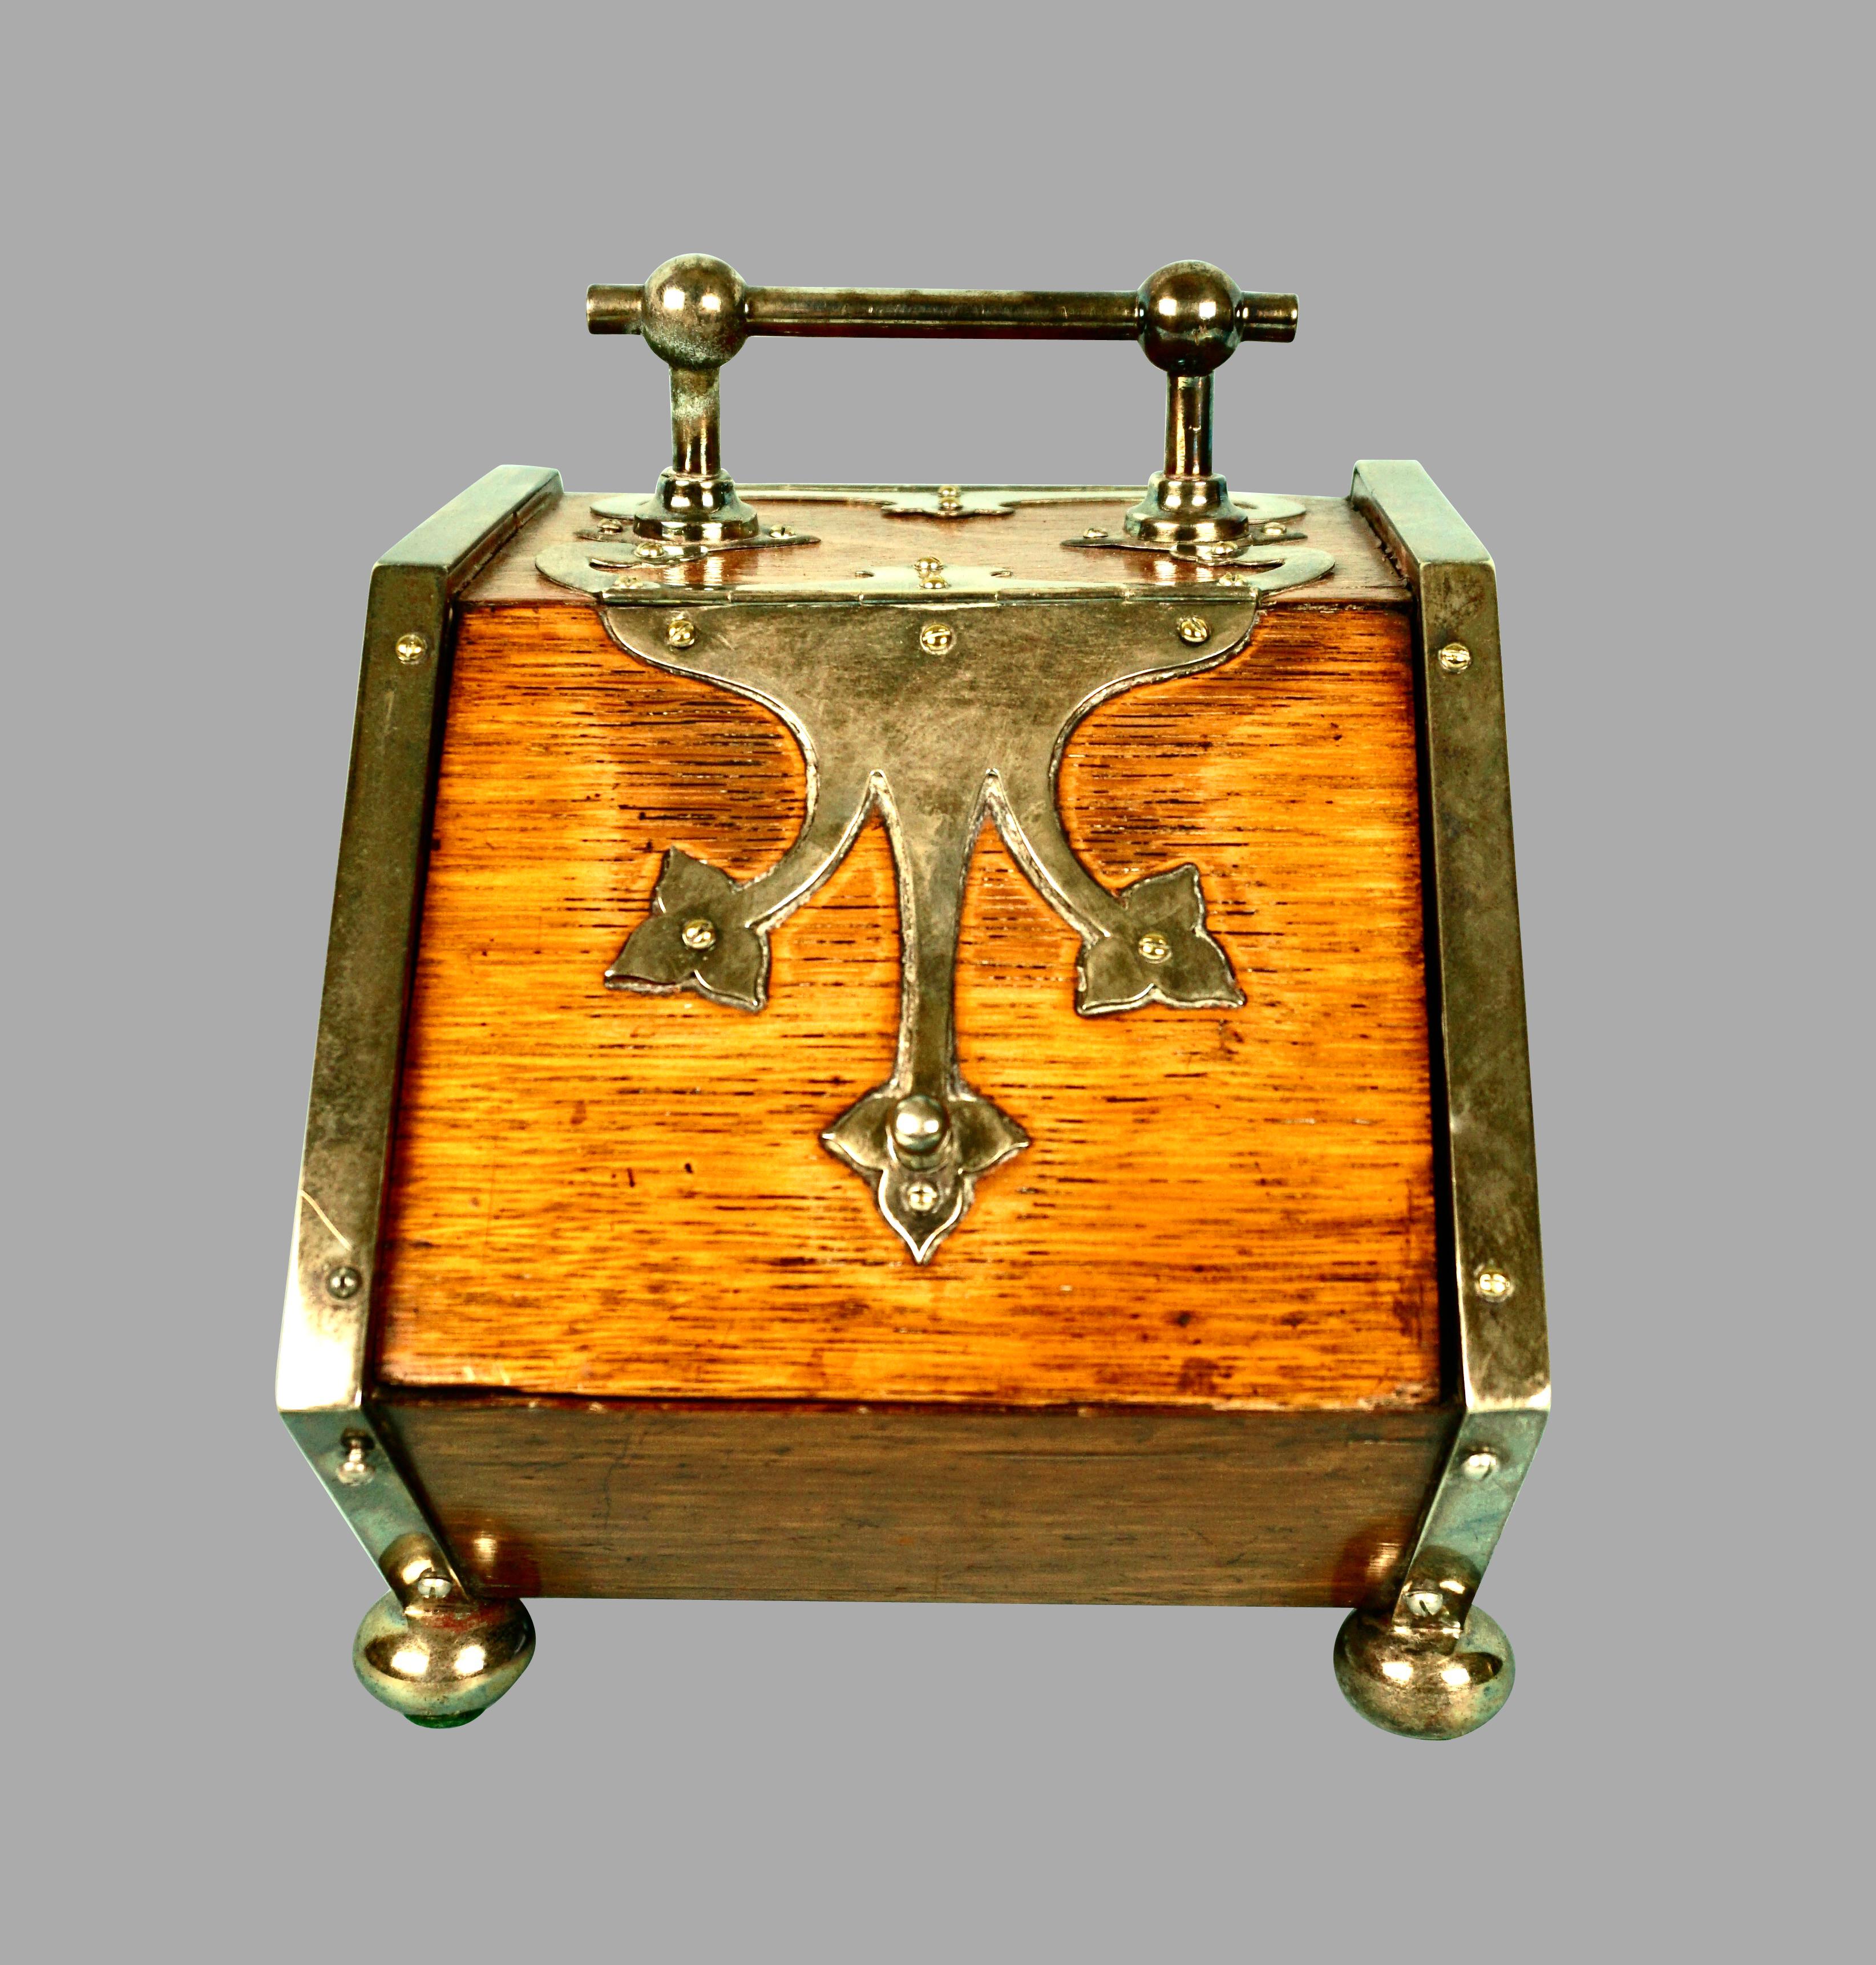 A very unusual English oak and silver plate biscuit server in the form of a coal scuttle. This piece is reminiscent of a patent model and is extremely well detailed.
It opens on both ends and is fully functional. A rare and charming piece of English